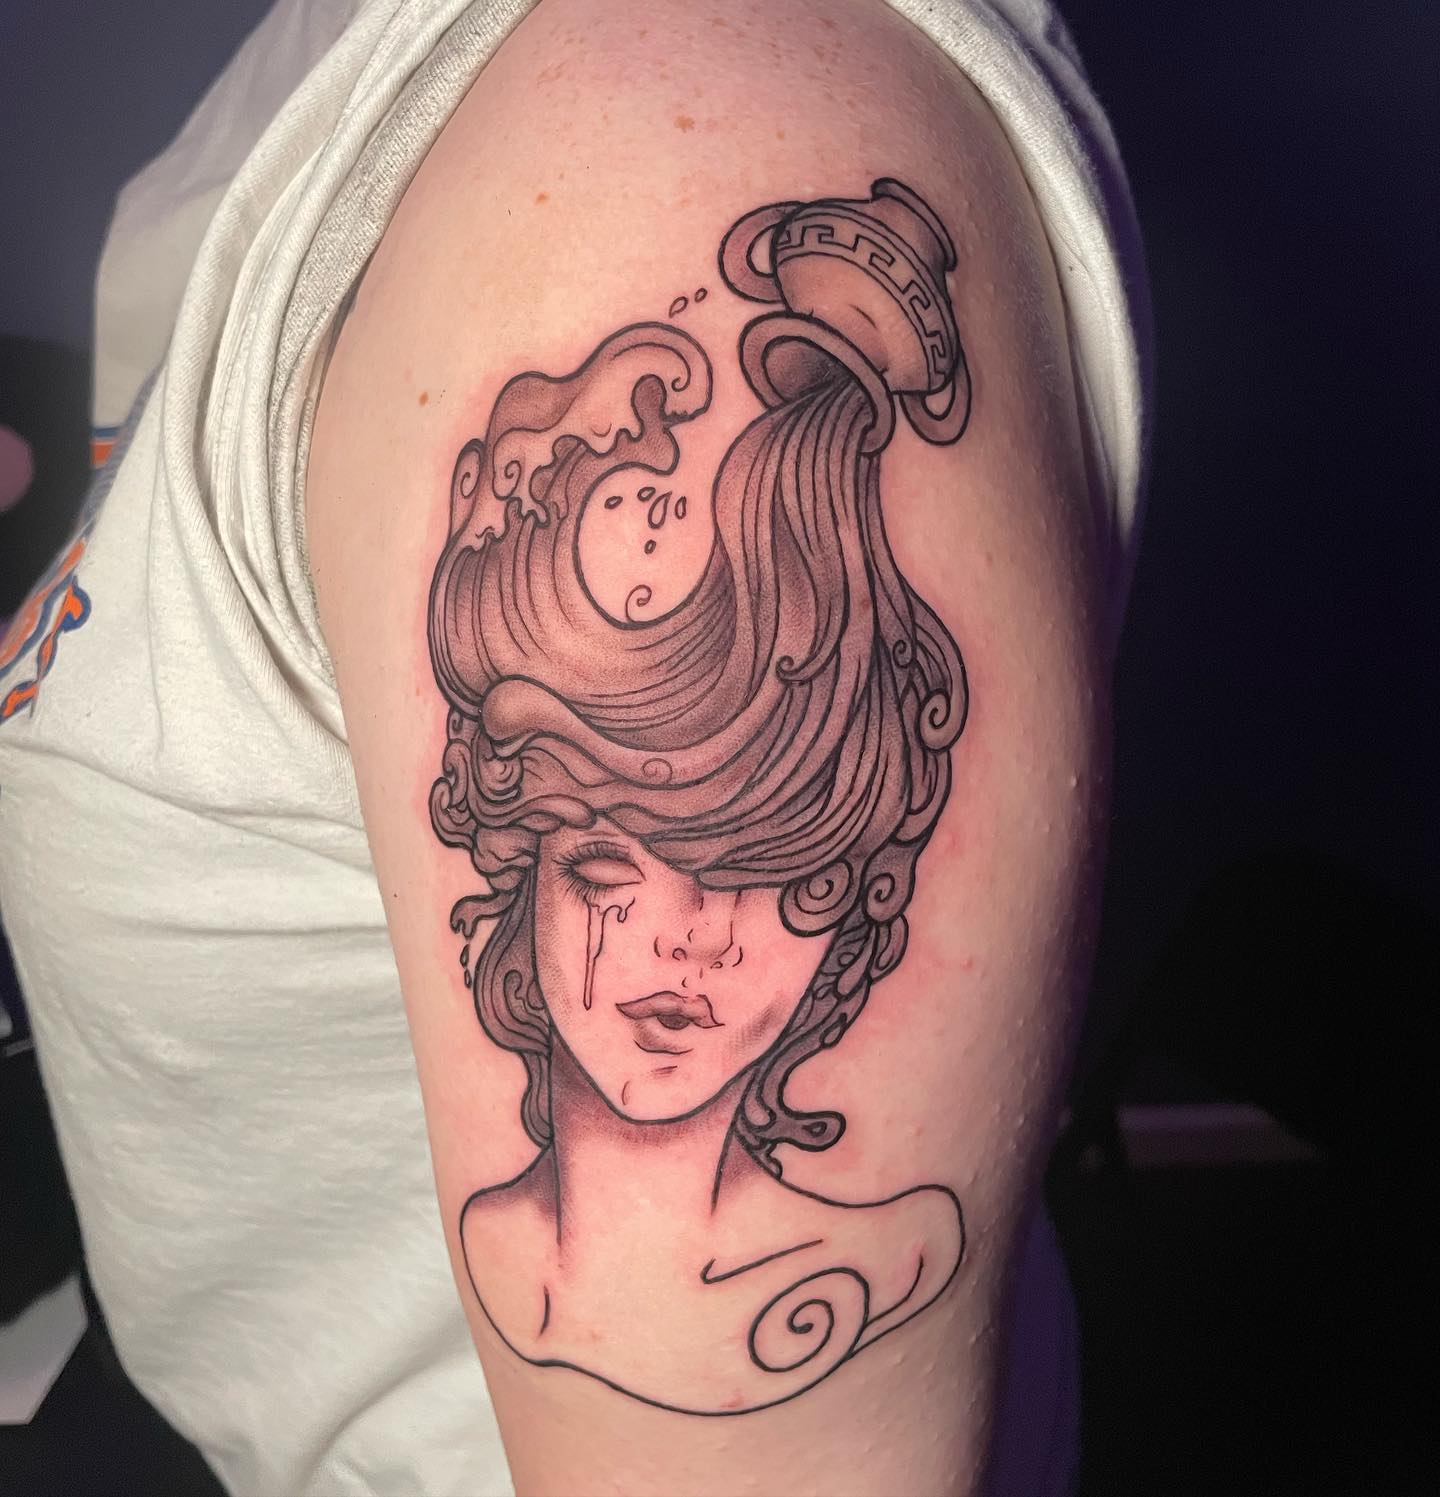 Are you looking for an Aquarius tattoo that is quite amazing? Then, you should go for this one. In this bust, the woman's hair is created with the running water. She is weeping but we all know that she is super-strong. I mean, she is Aquarius.